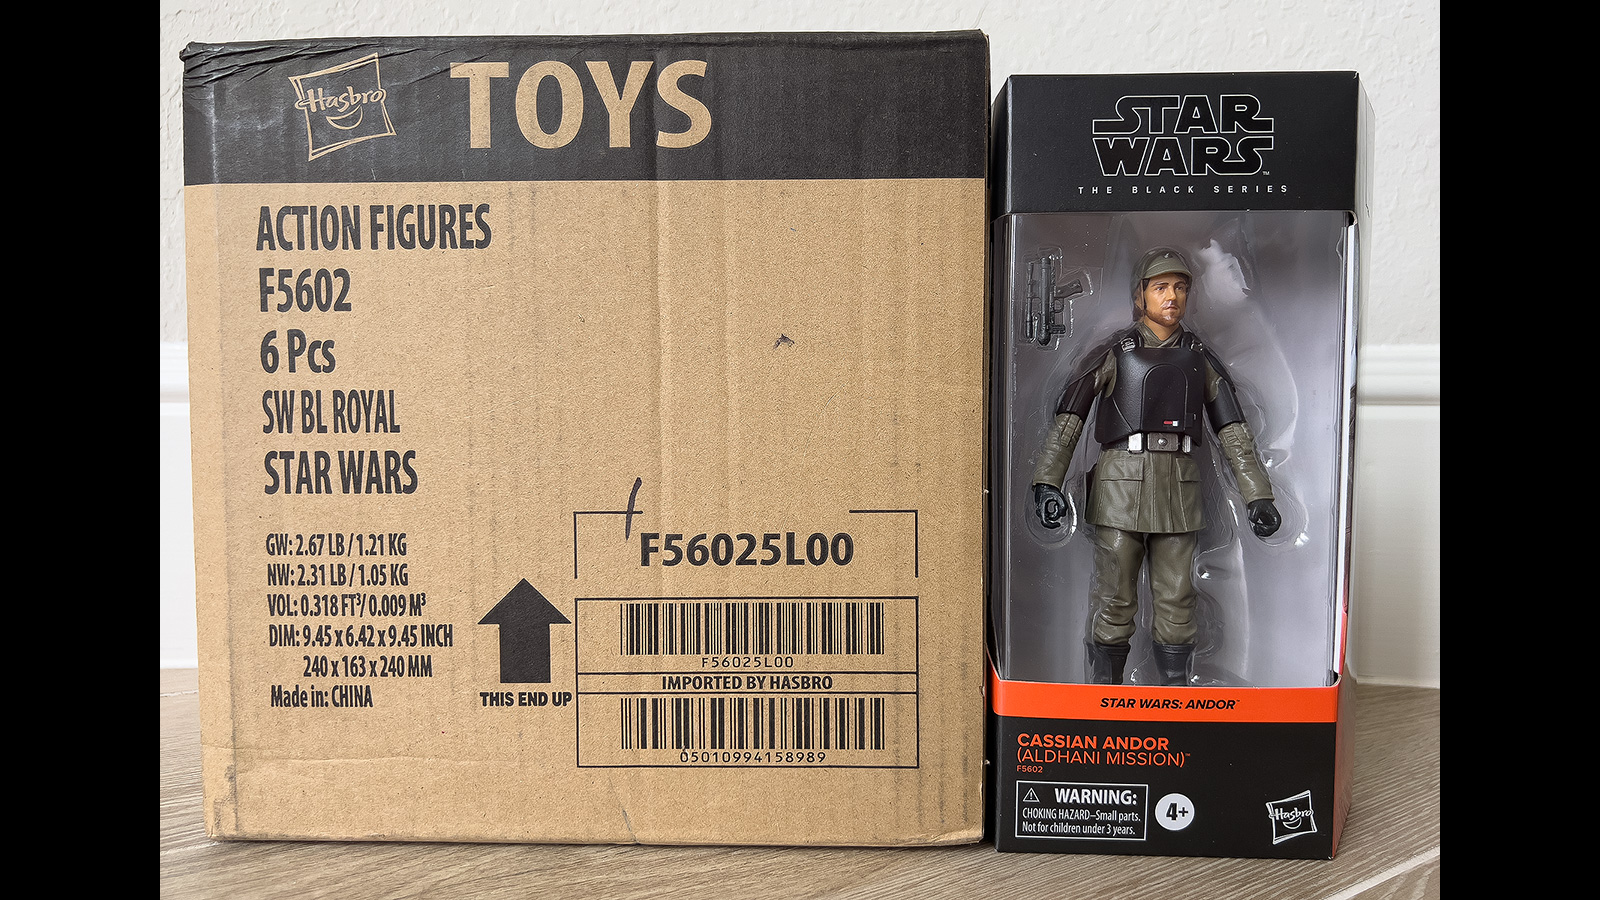 Mail Call 1/11/23 - Walmart Exclusive TBS 6-Inch Cassian Andor (Aldhani Mission) - Shipped In Hasbro Box